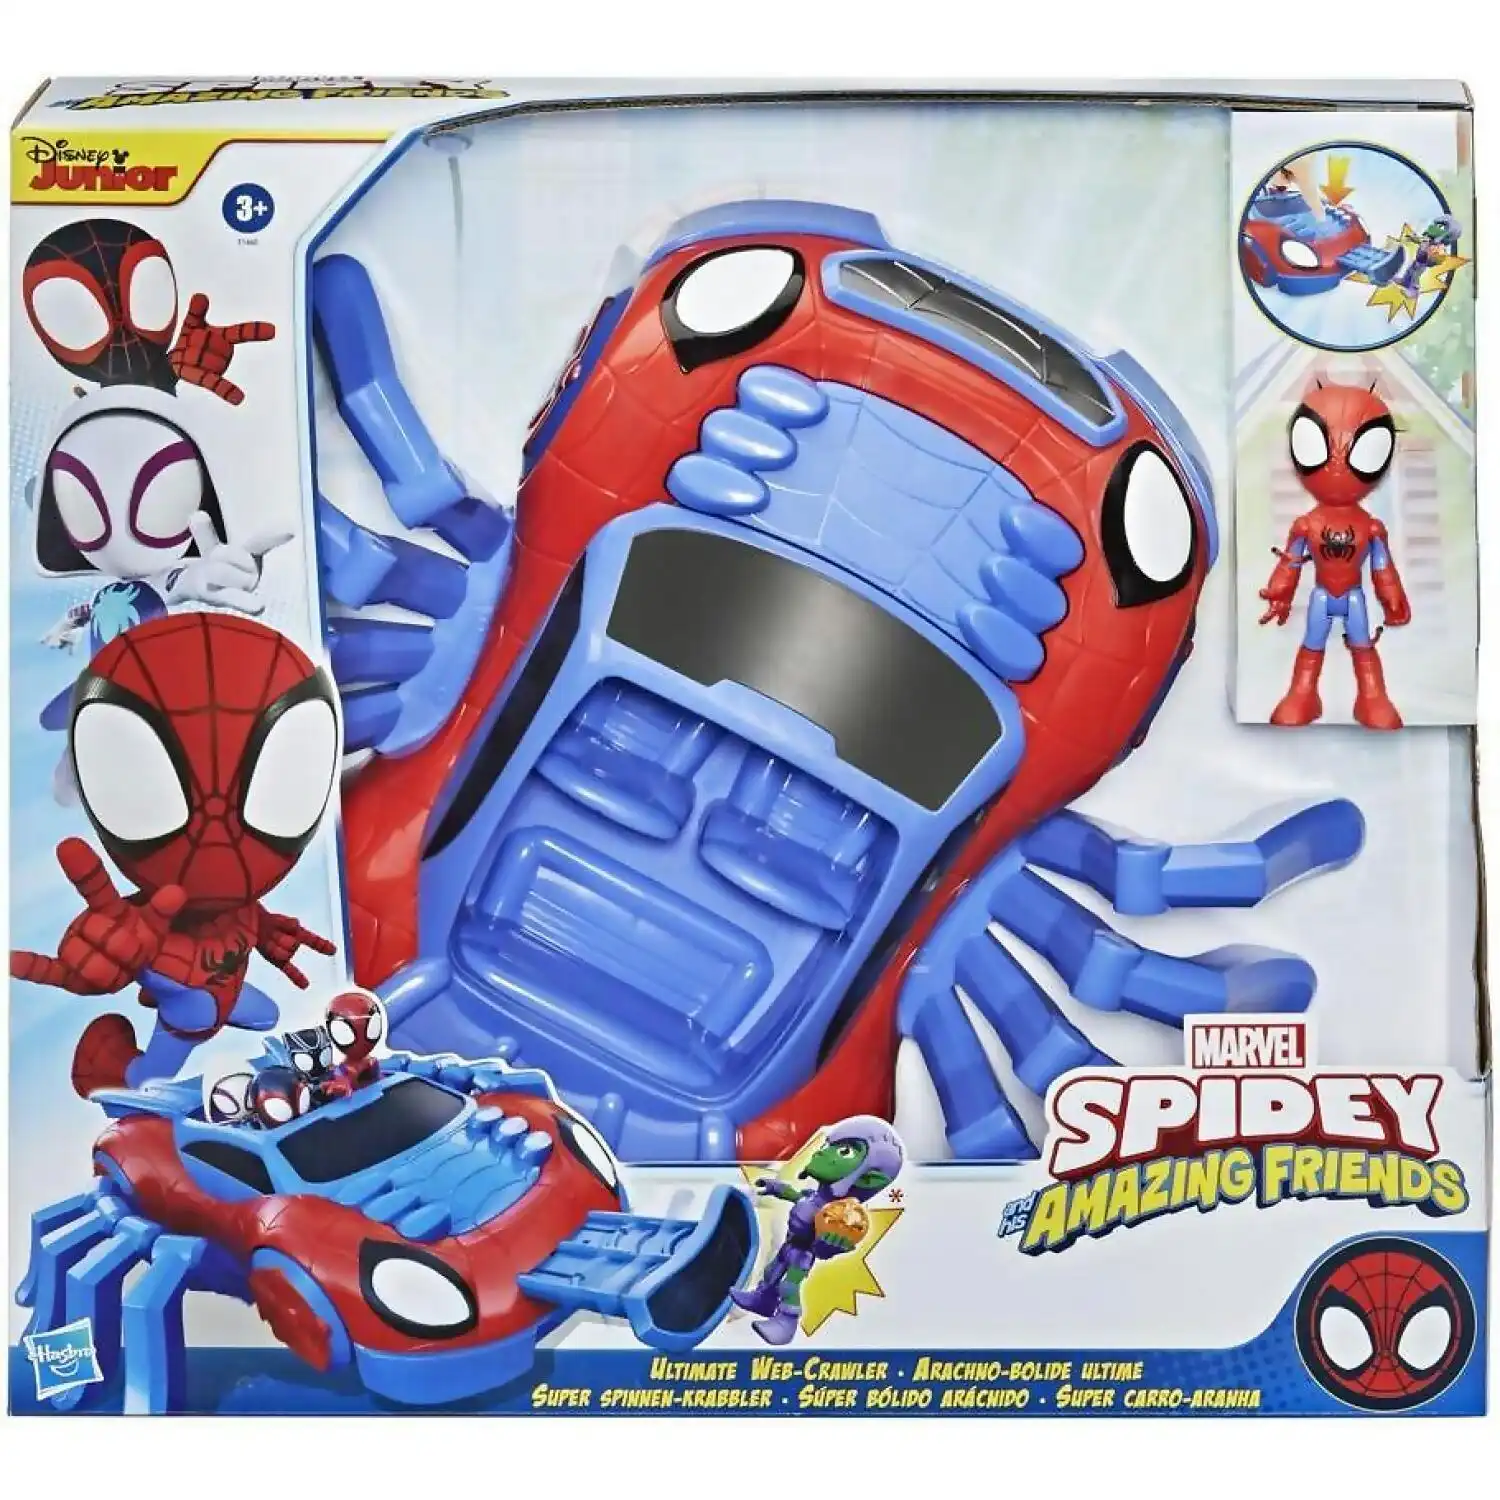 Marvel - Spidey And His Amazing Friends Ultimate Web-crawler With Spidey Stunner Feature And 4-inch Spidey Figure